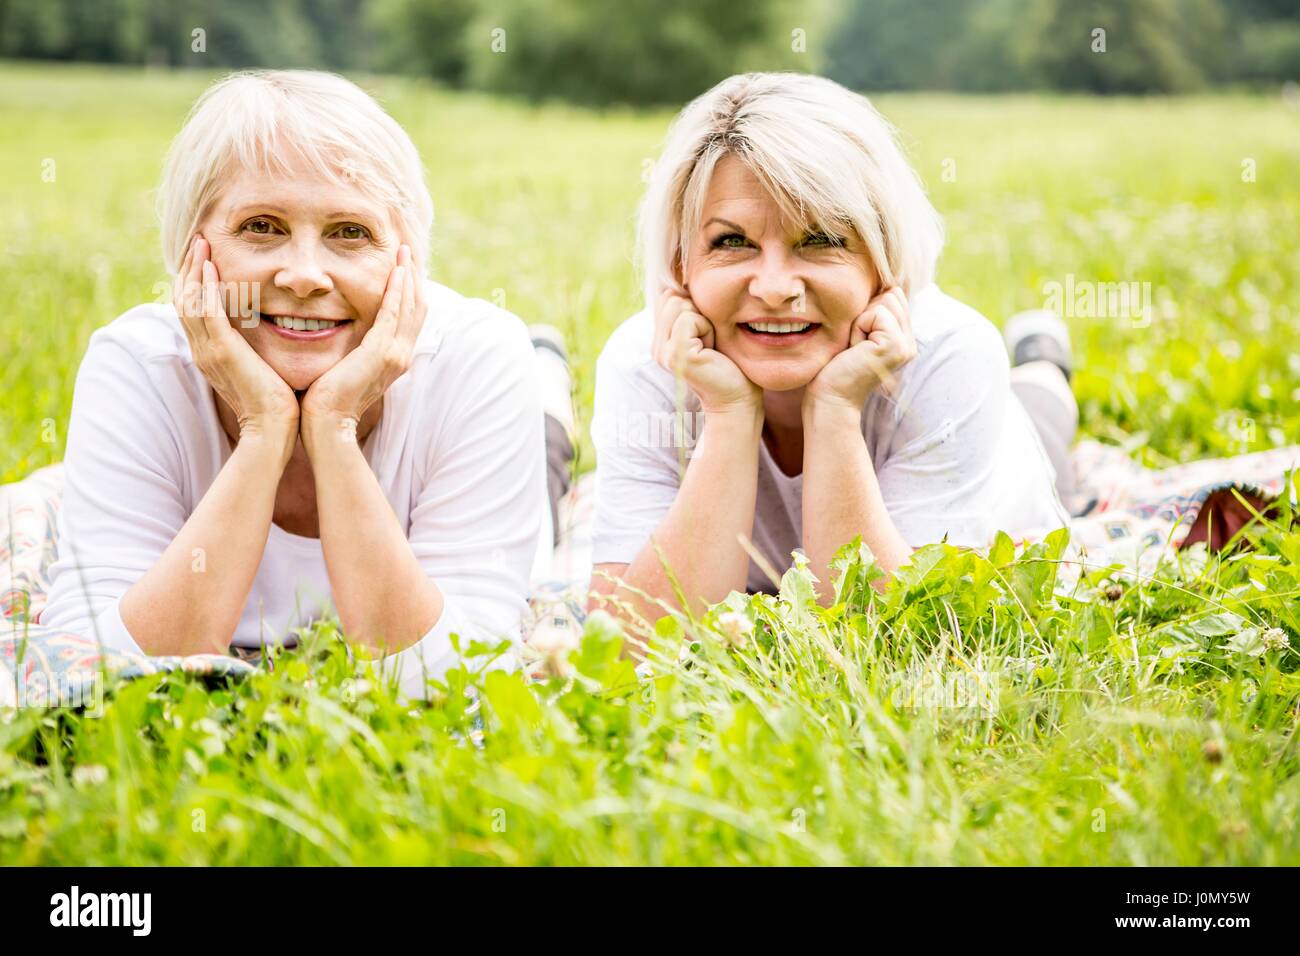 Two women lying on grass with hands on chin. Stock Photo